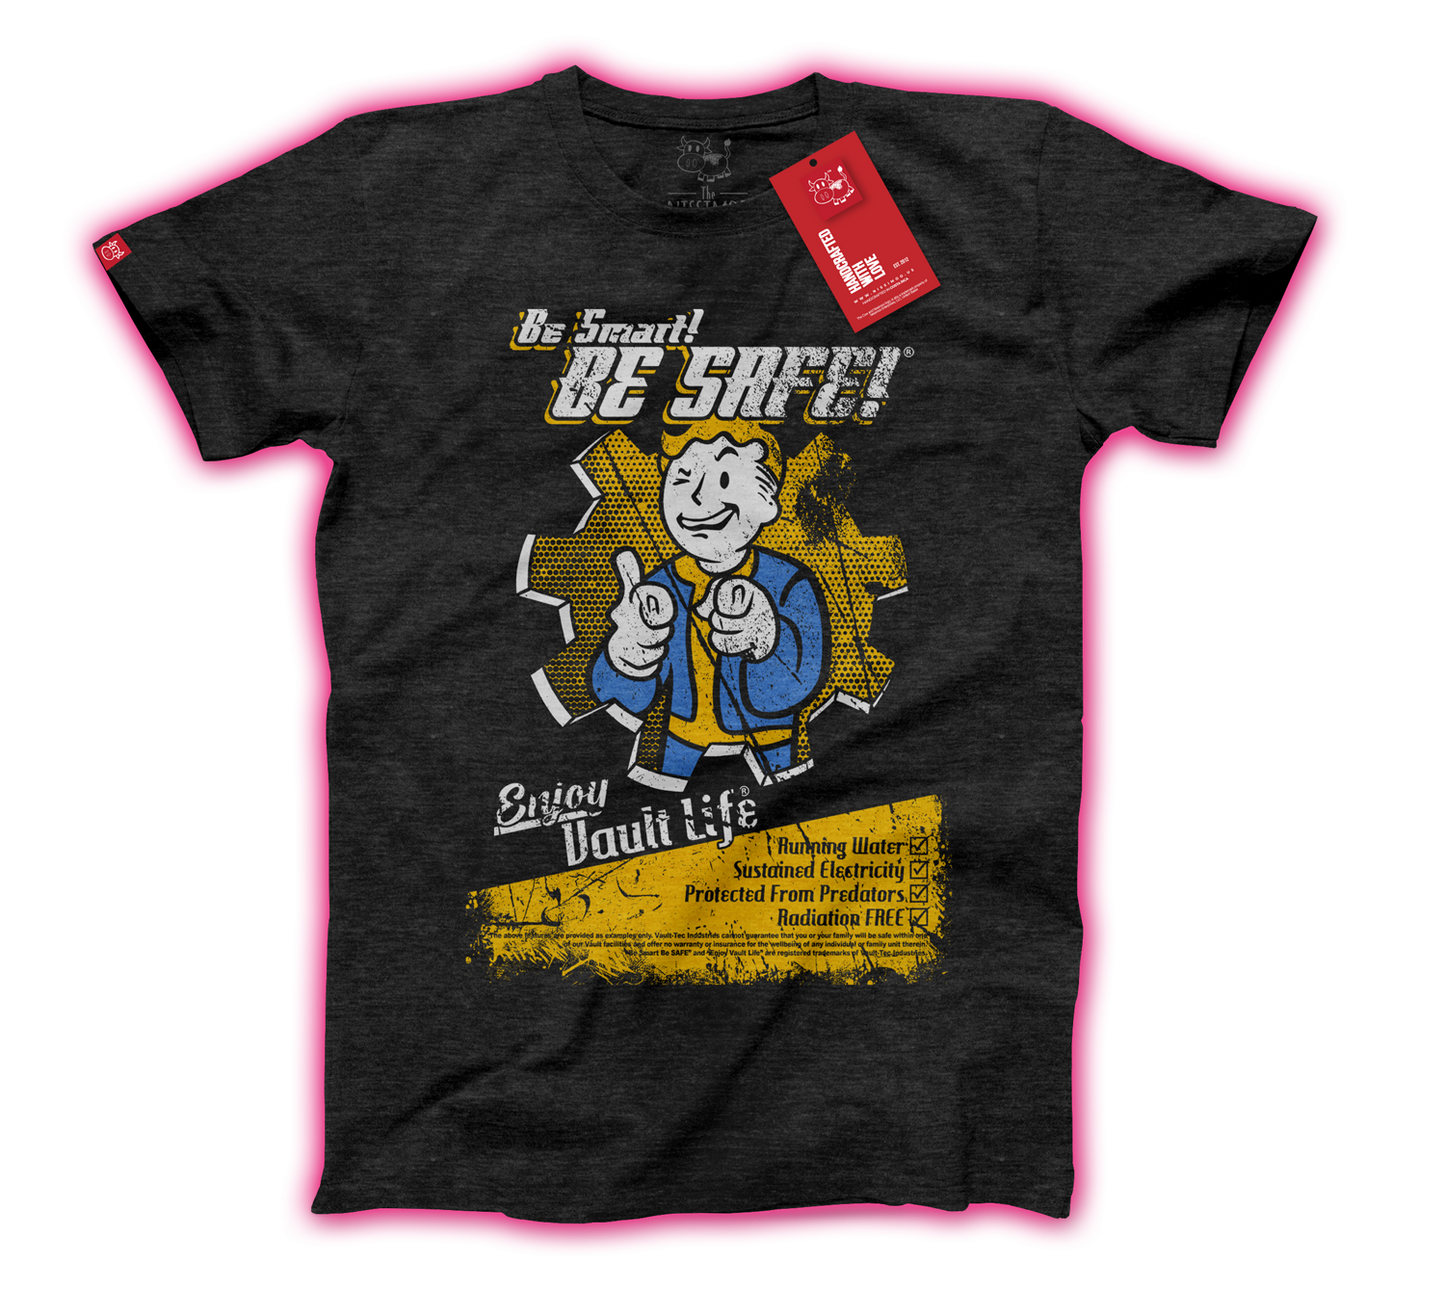 Fallout - Be Smart, BE SAFE! / PREORDEN 15% Off